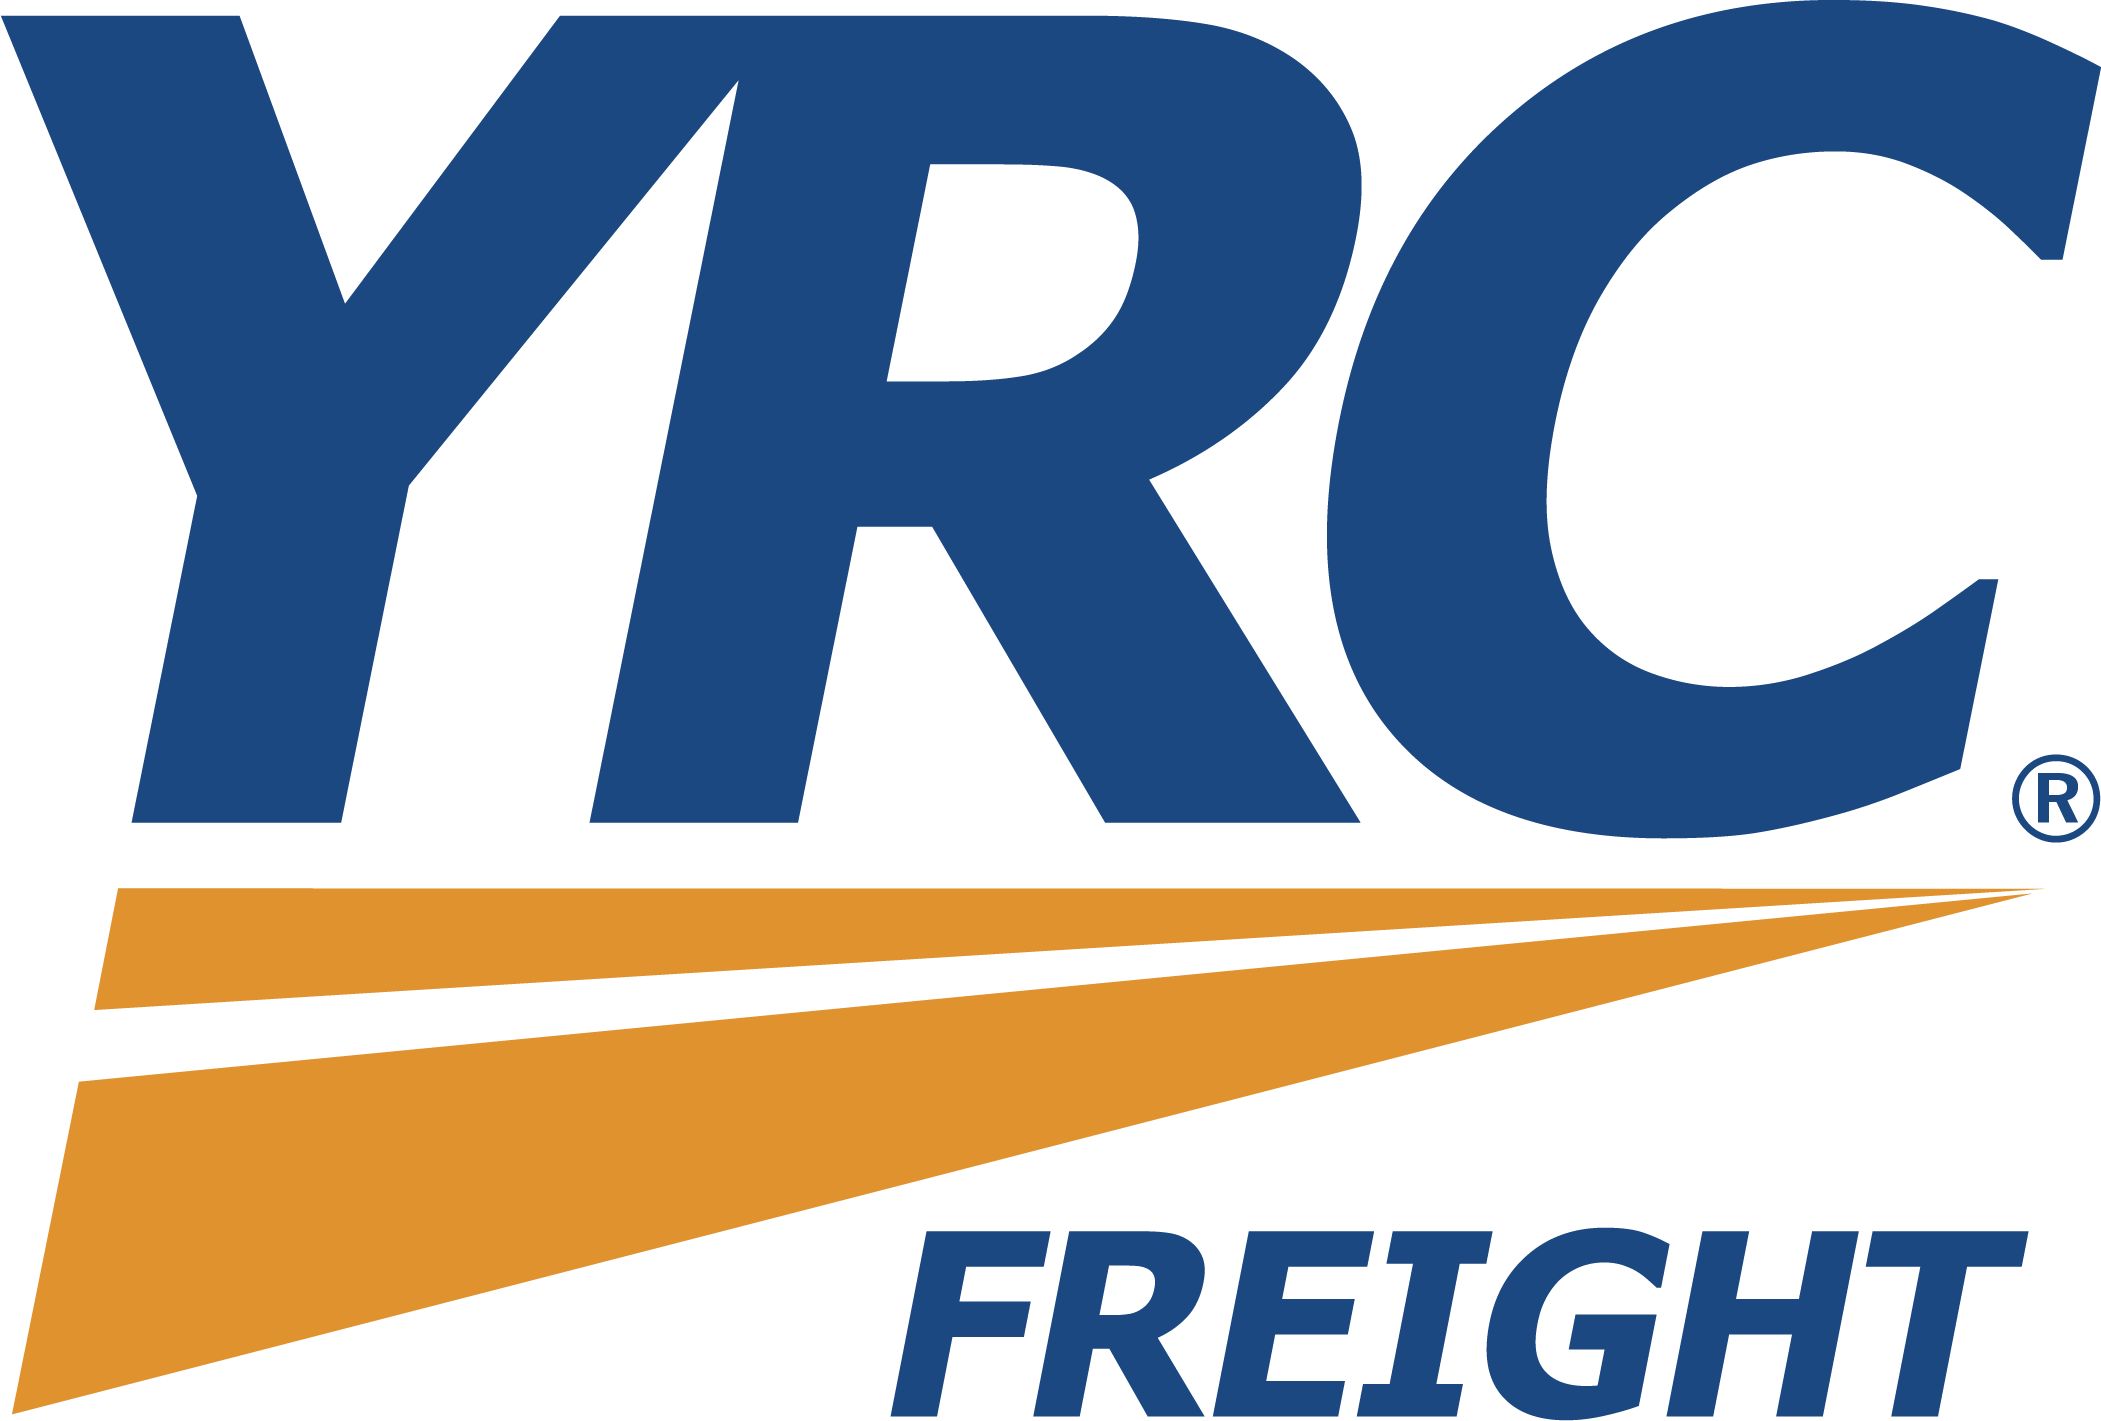 Full Truckload Freight Shipping - Yrc Freight New (2101x1421)